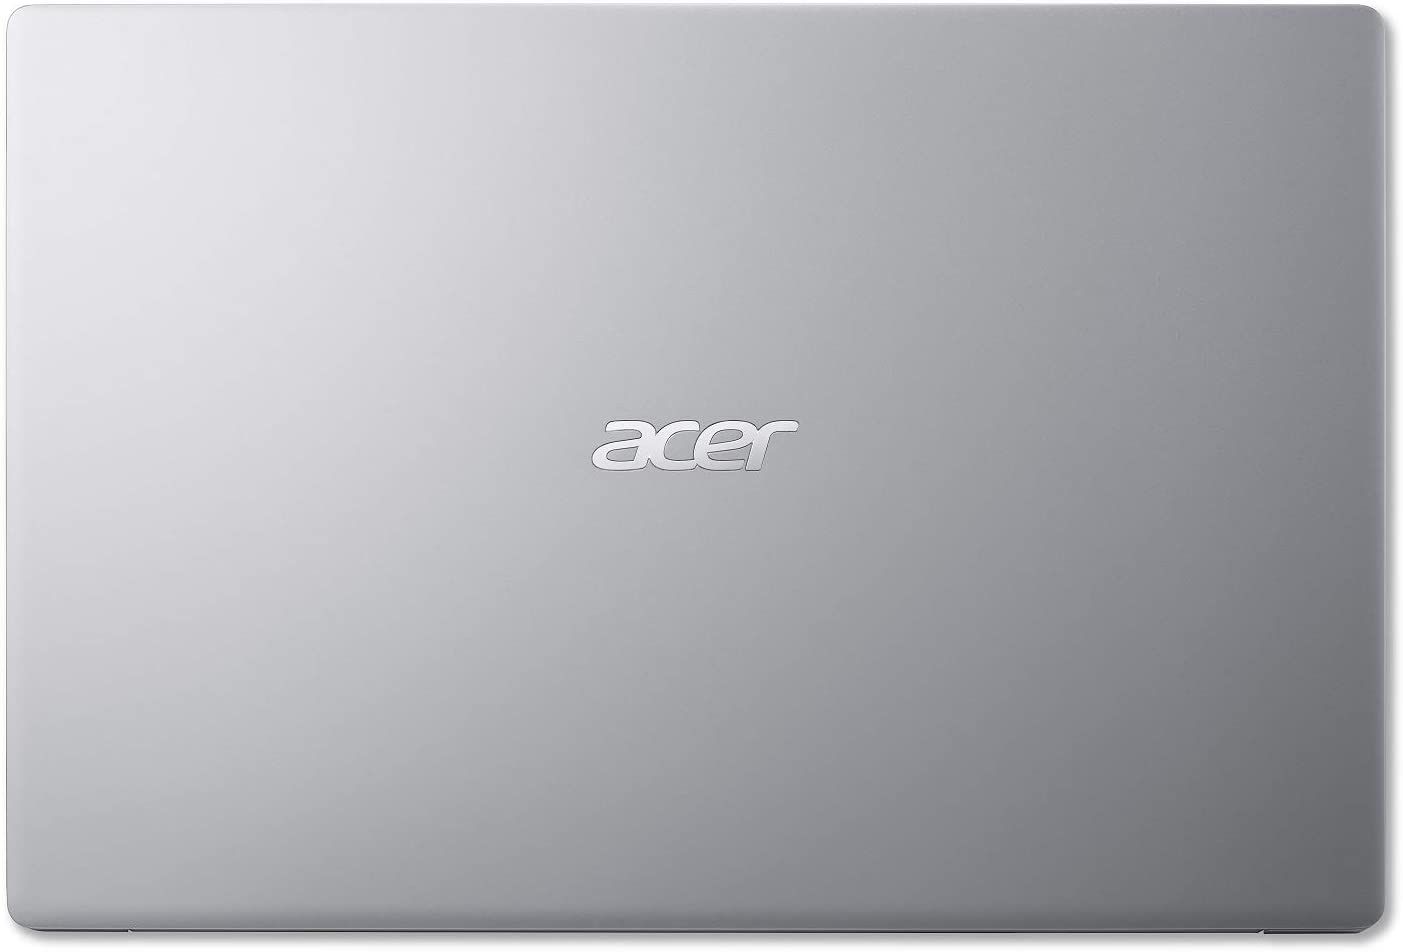 Acer Swift 3 closed lid